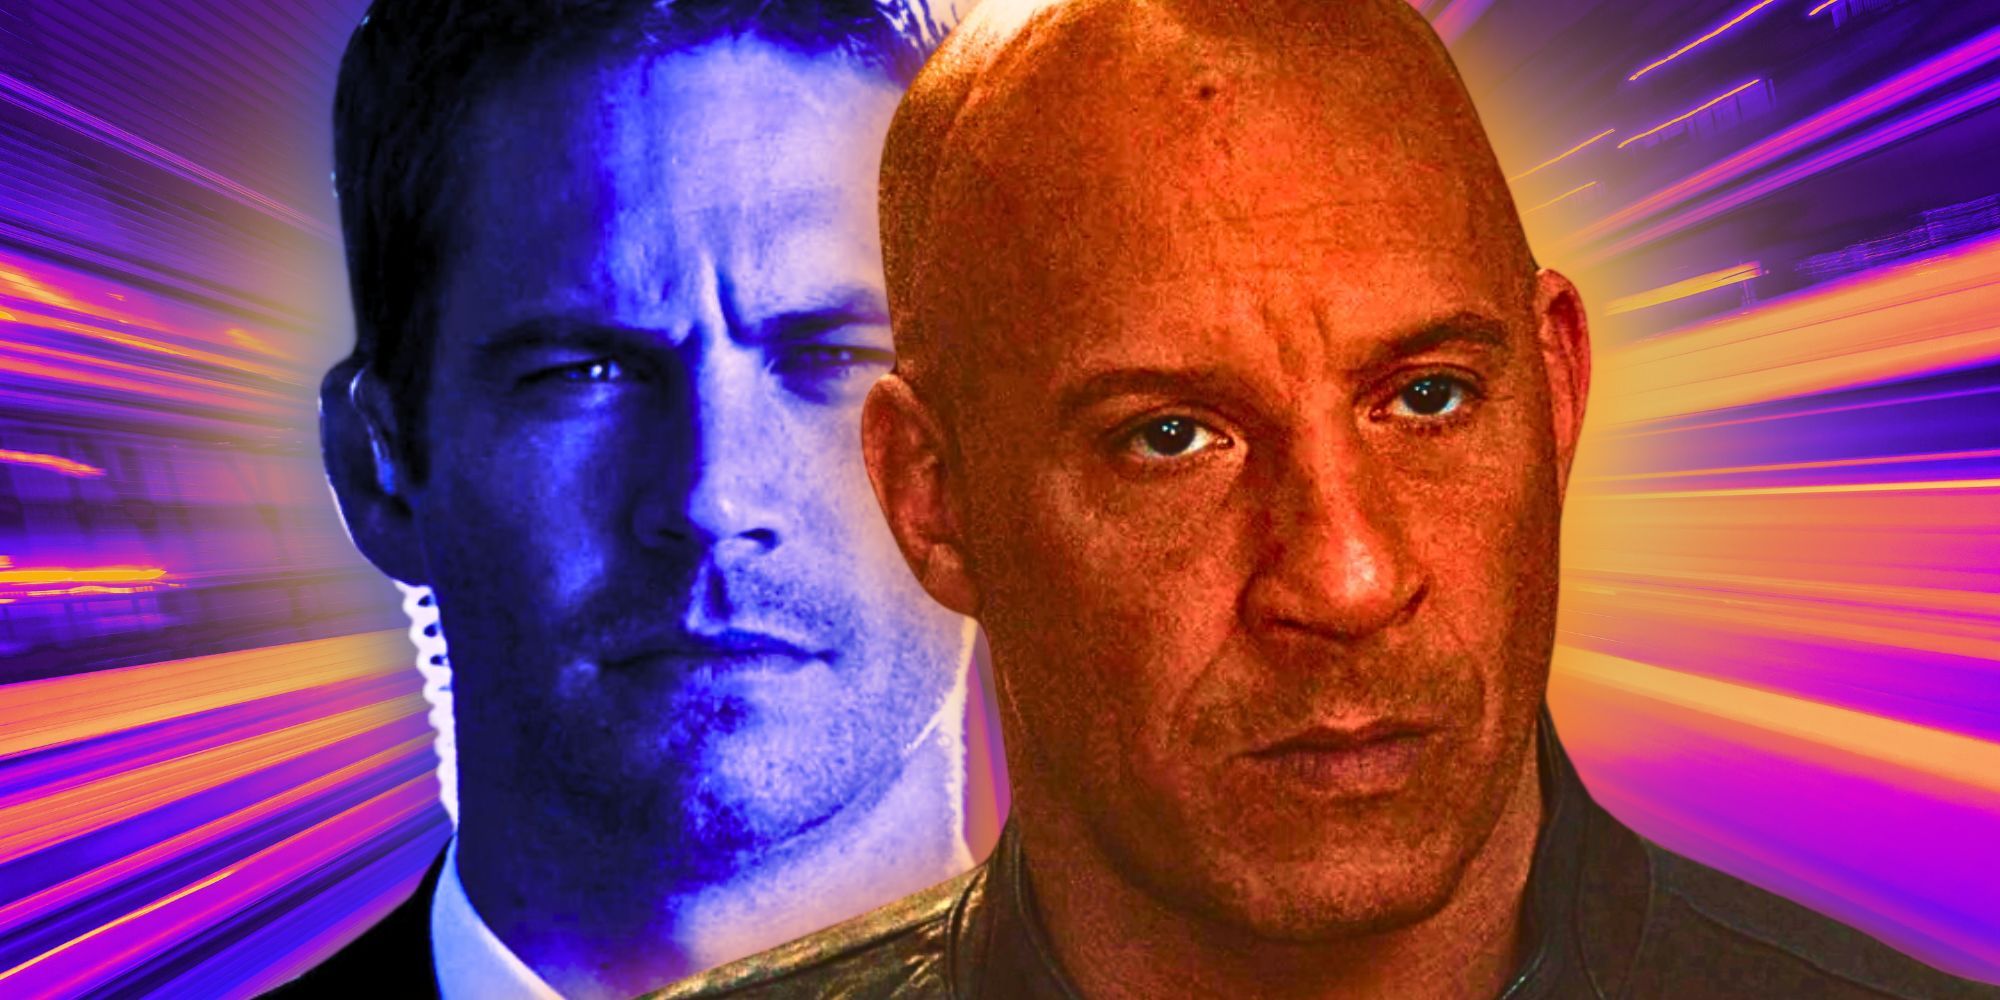 Paul Walker as Brian O'Conner and Vin Diesel as Dominic Toretto in Fast and Furious